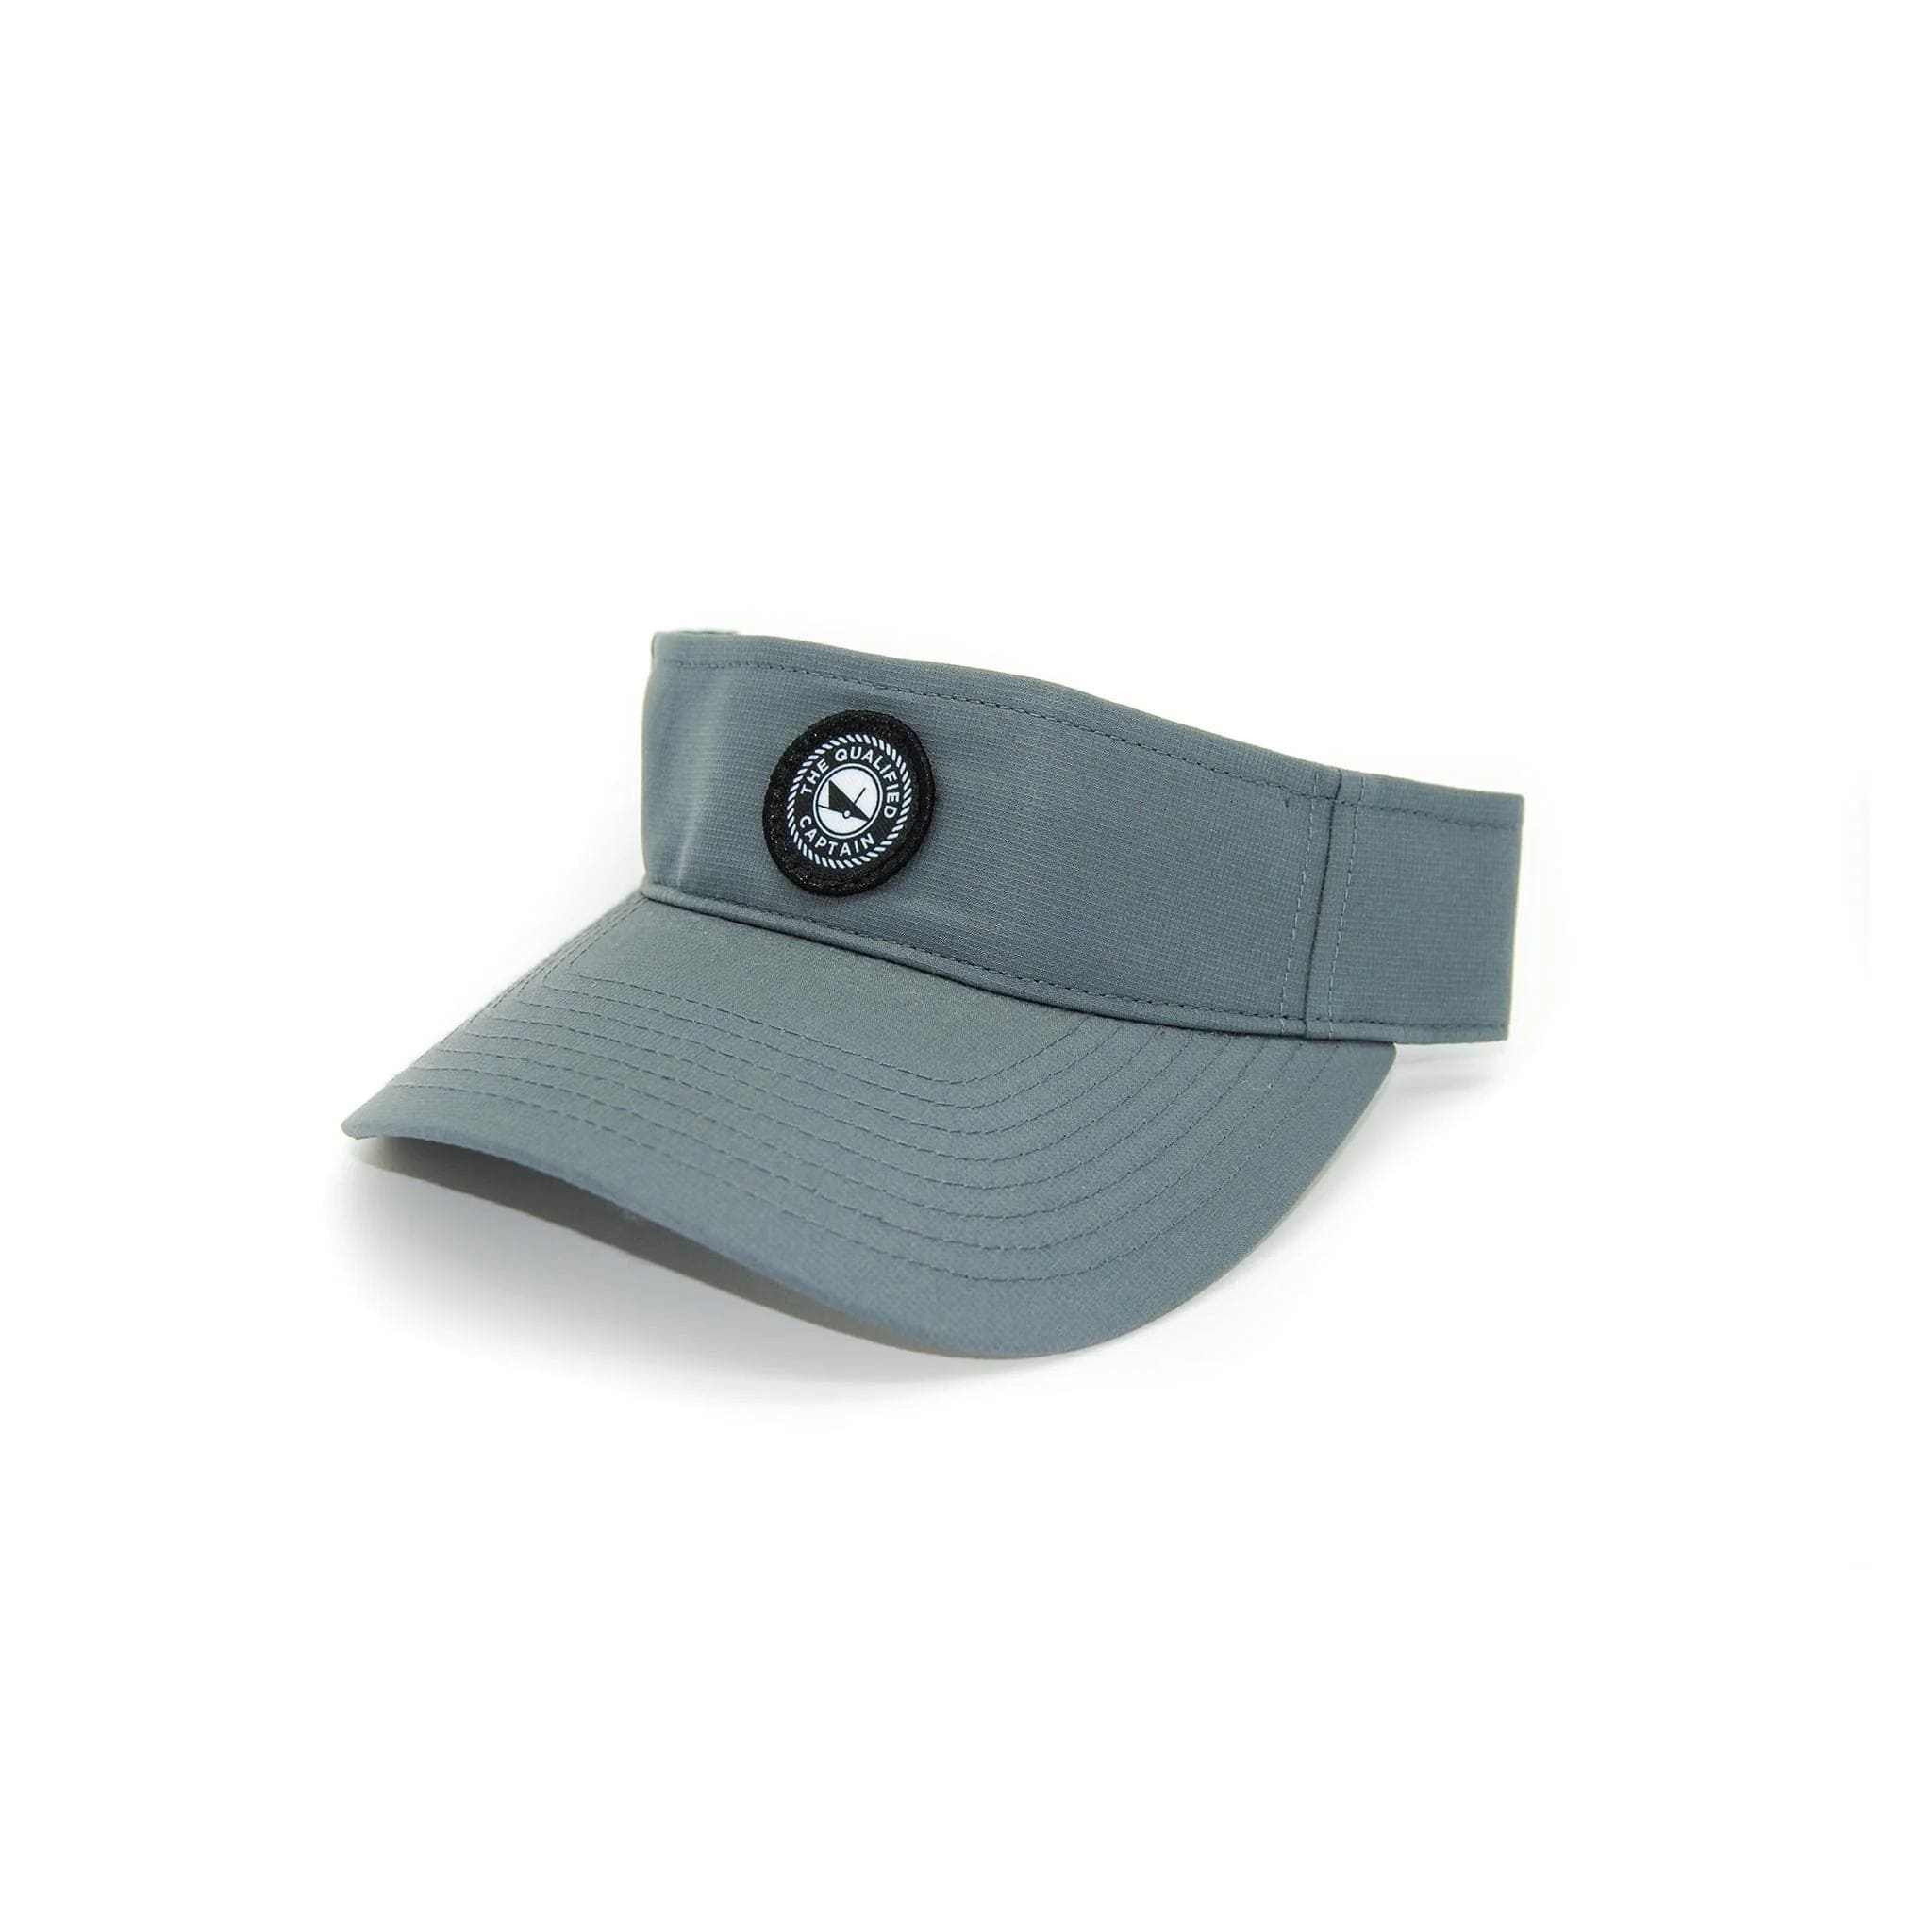 New Fishing Gear Tagged visor - The Saltwater Edge